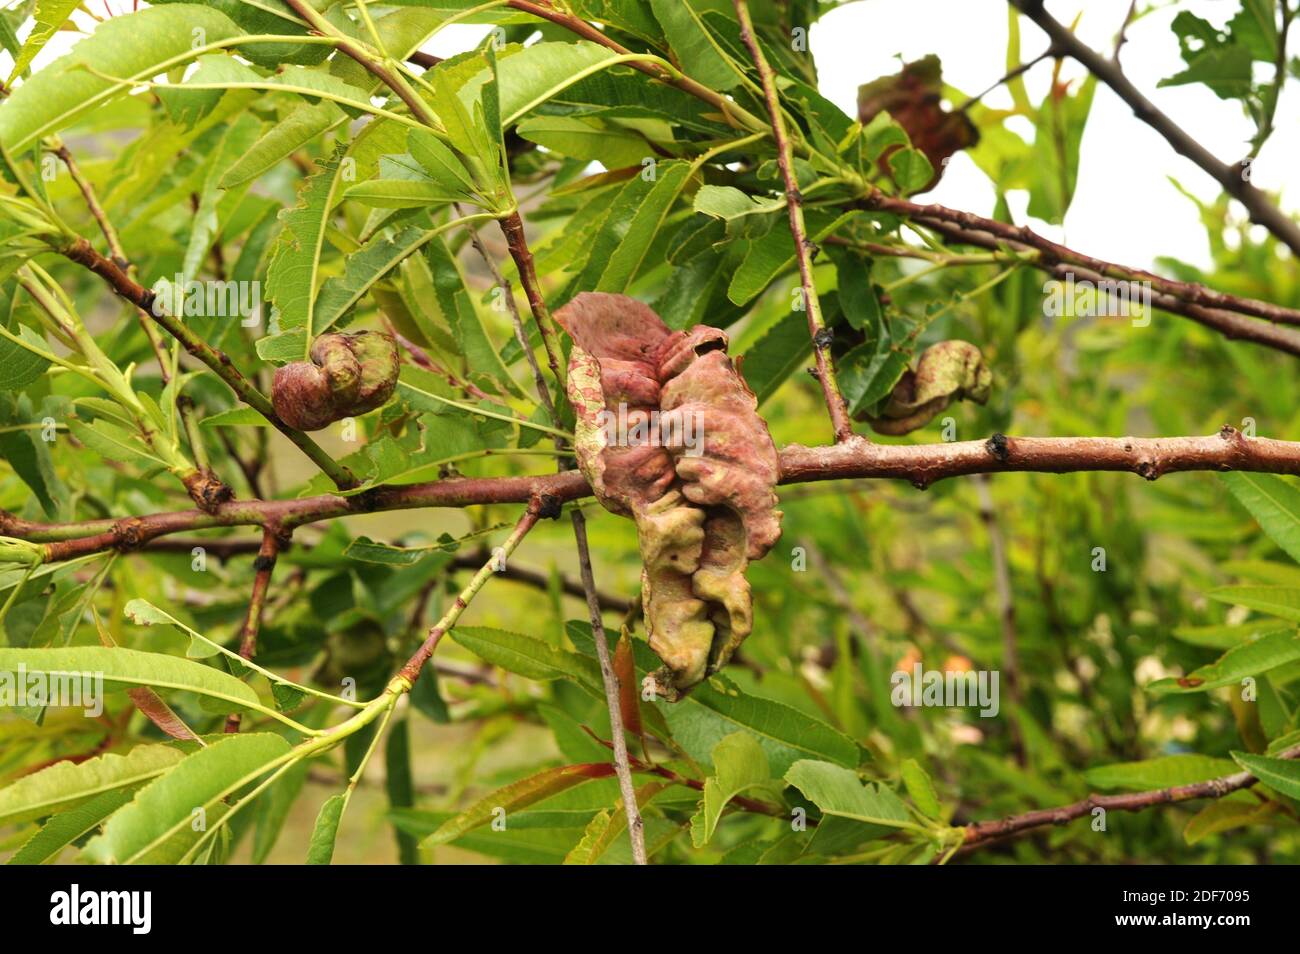 Taphrina deformans is a parasite fungus that grows on peach leaves. Stock Photo